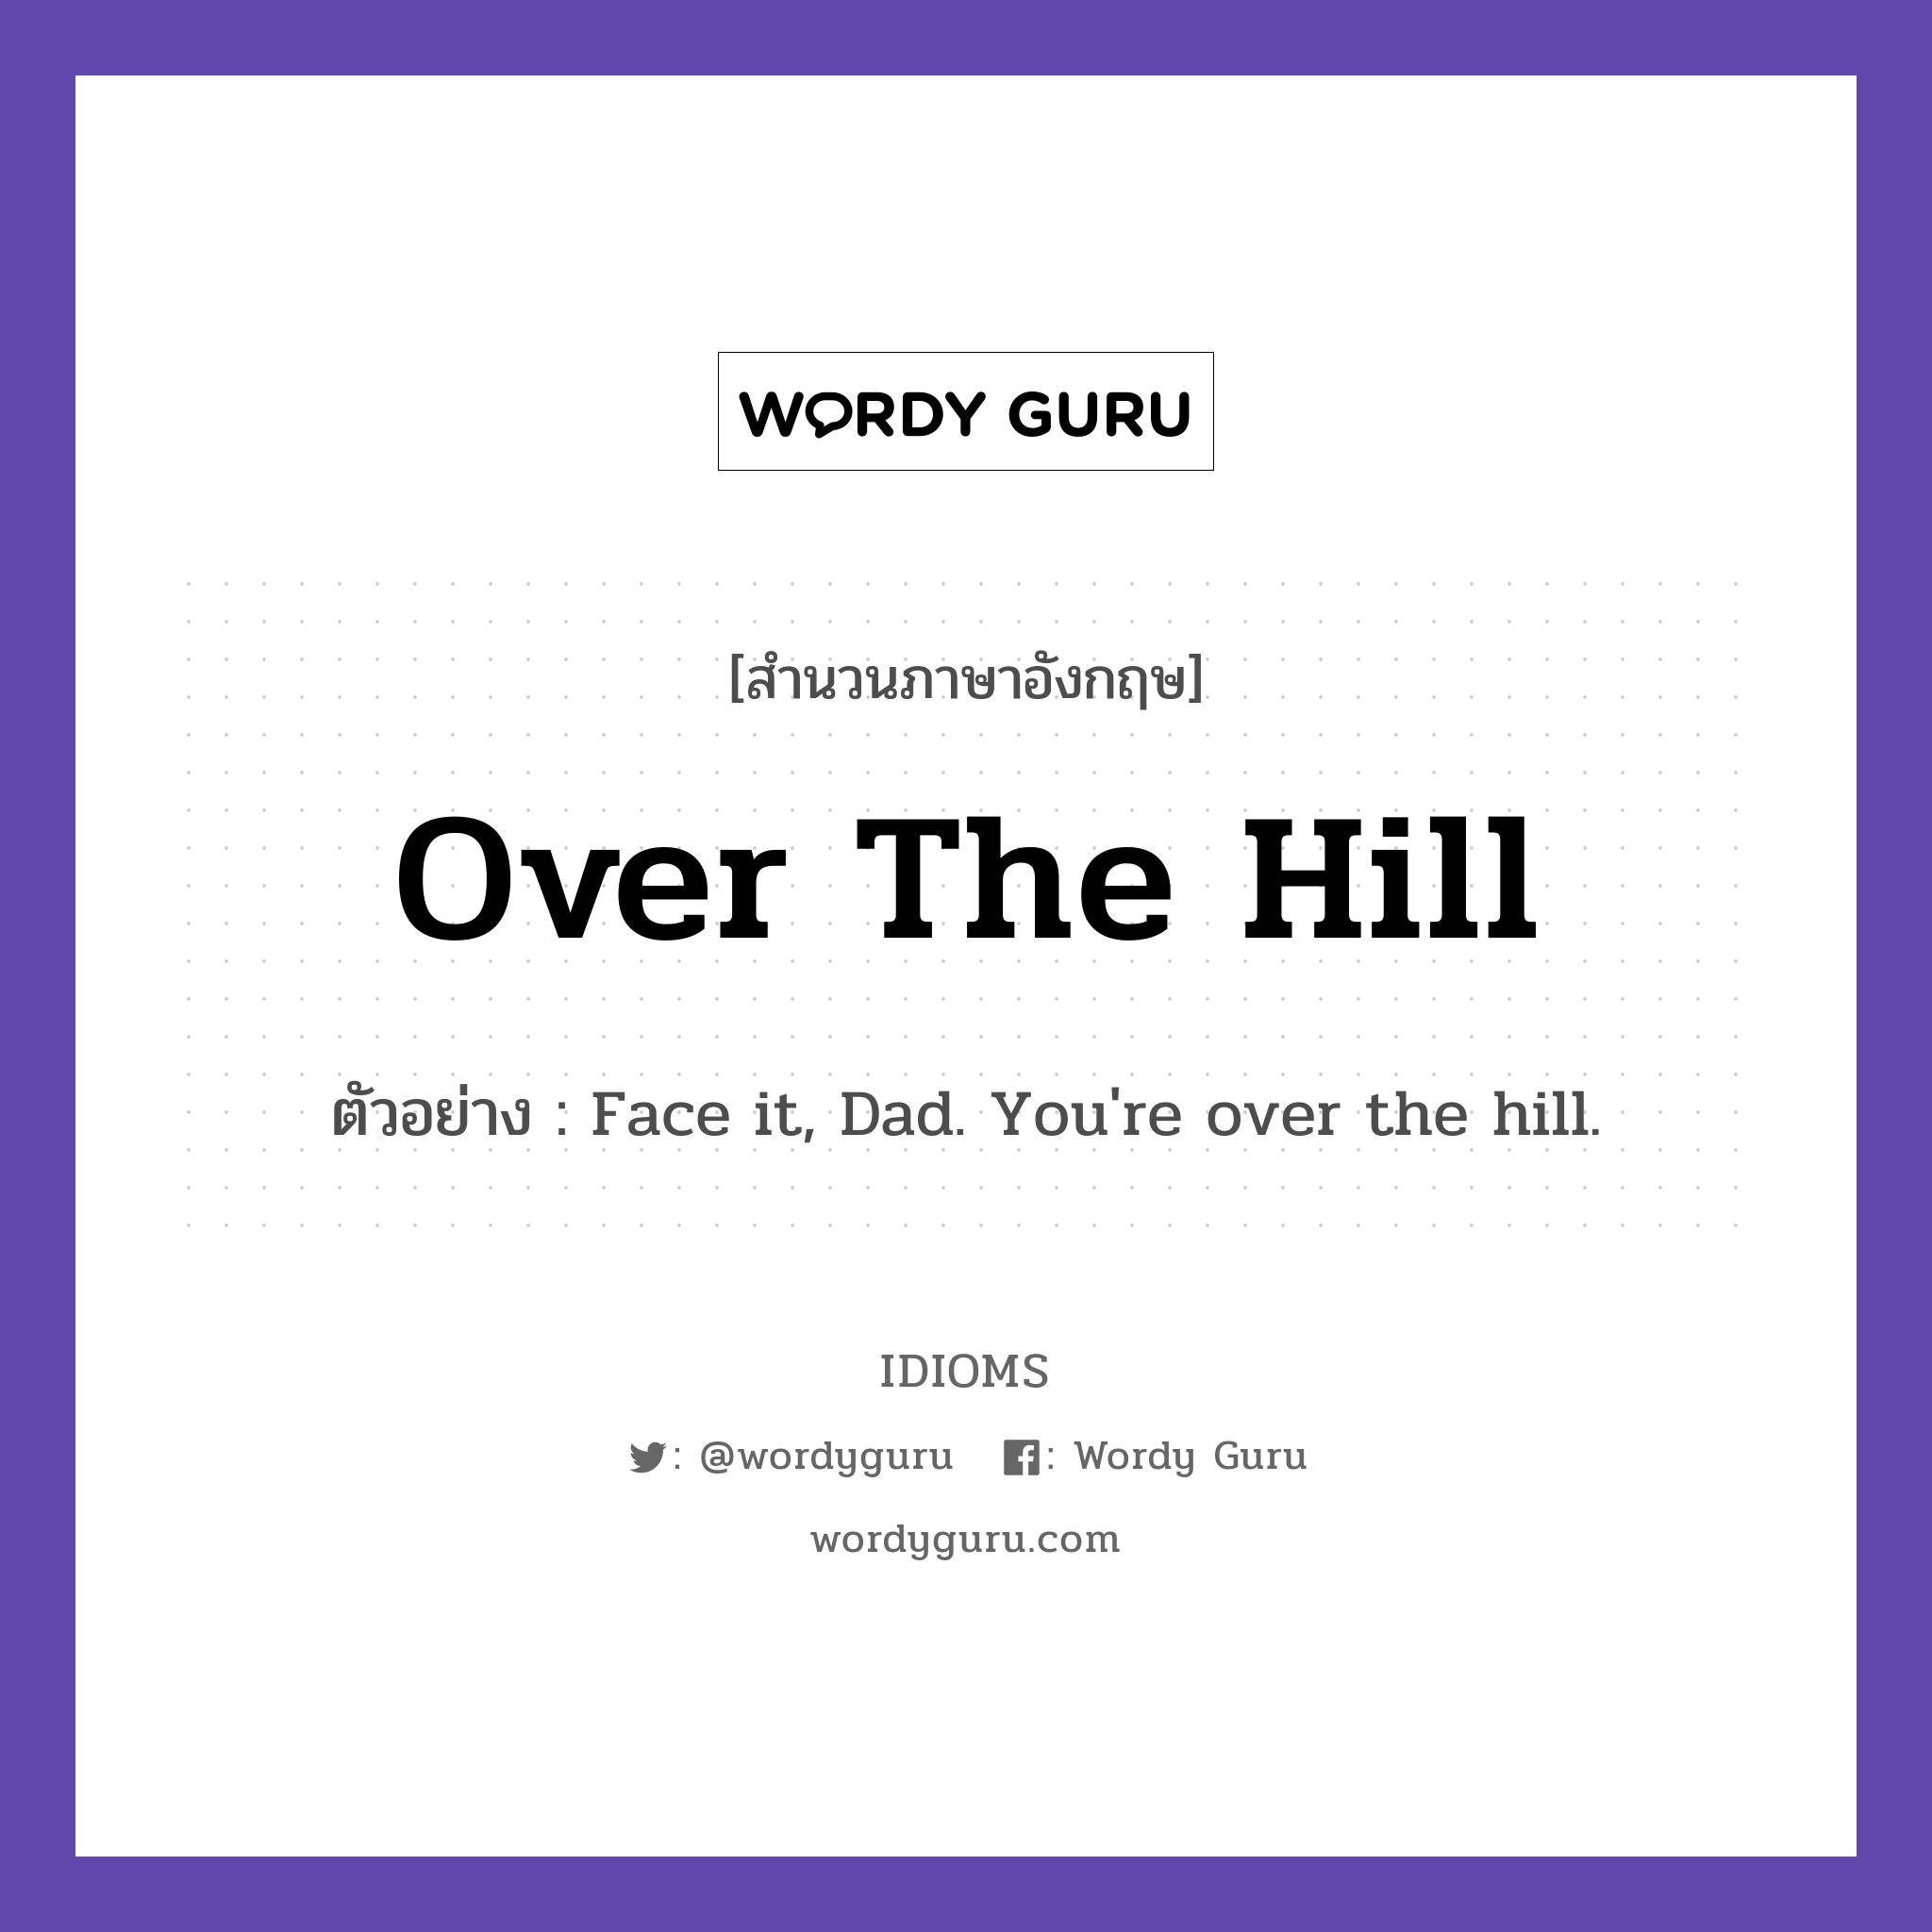 Over The Hill แปลว่า?, สำนวนภาษาอังกฤษ Over The Hill ตัวอย่าง Face it, Dad. You're over the hill.